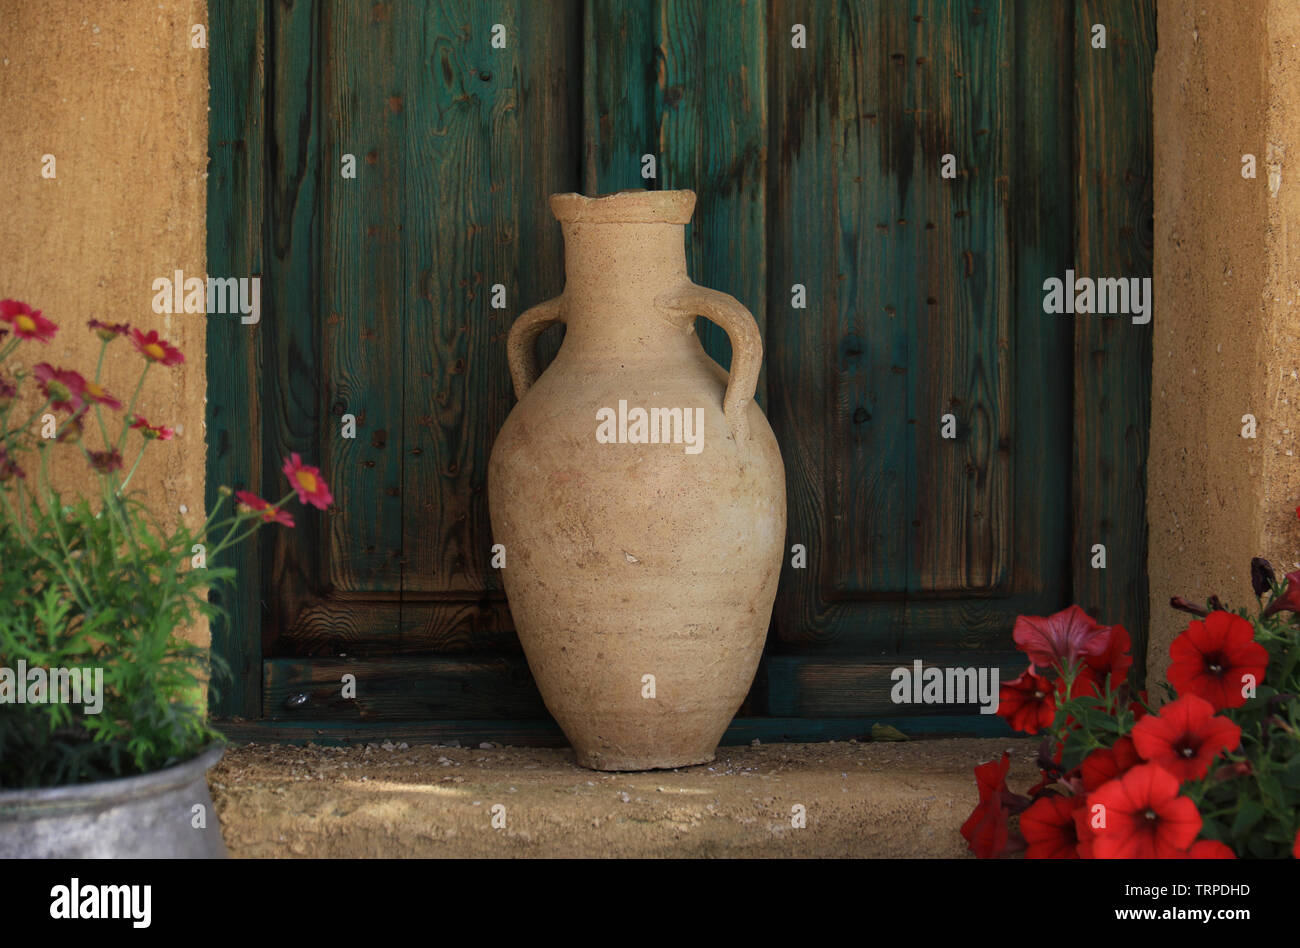 A traditional Lebanese terracotta jar in a garden setting in front of an old green window. Stock Photo